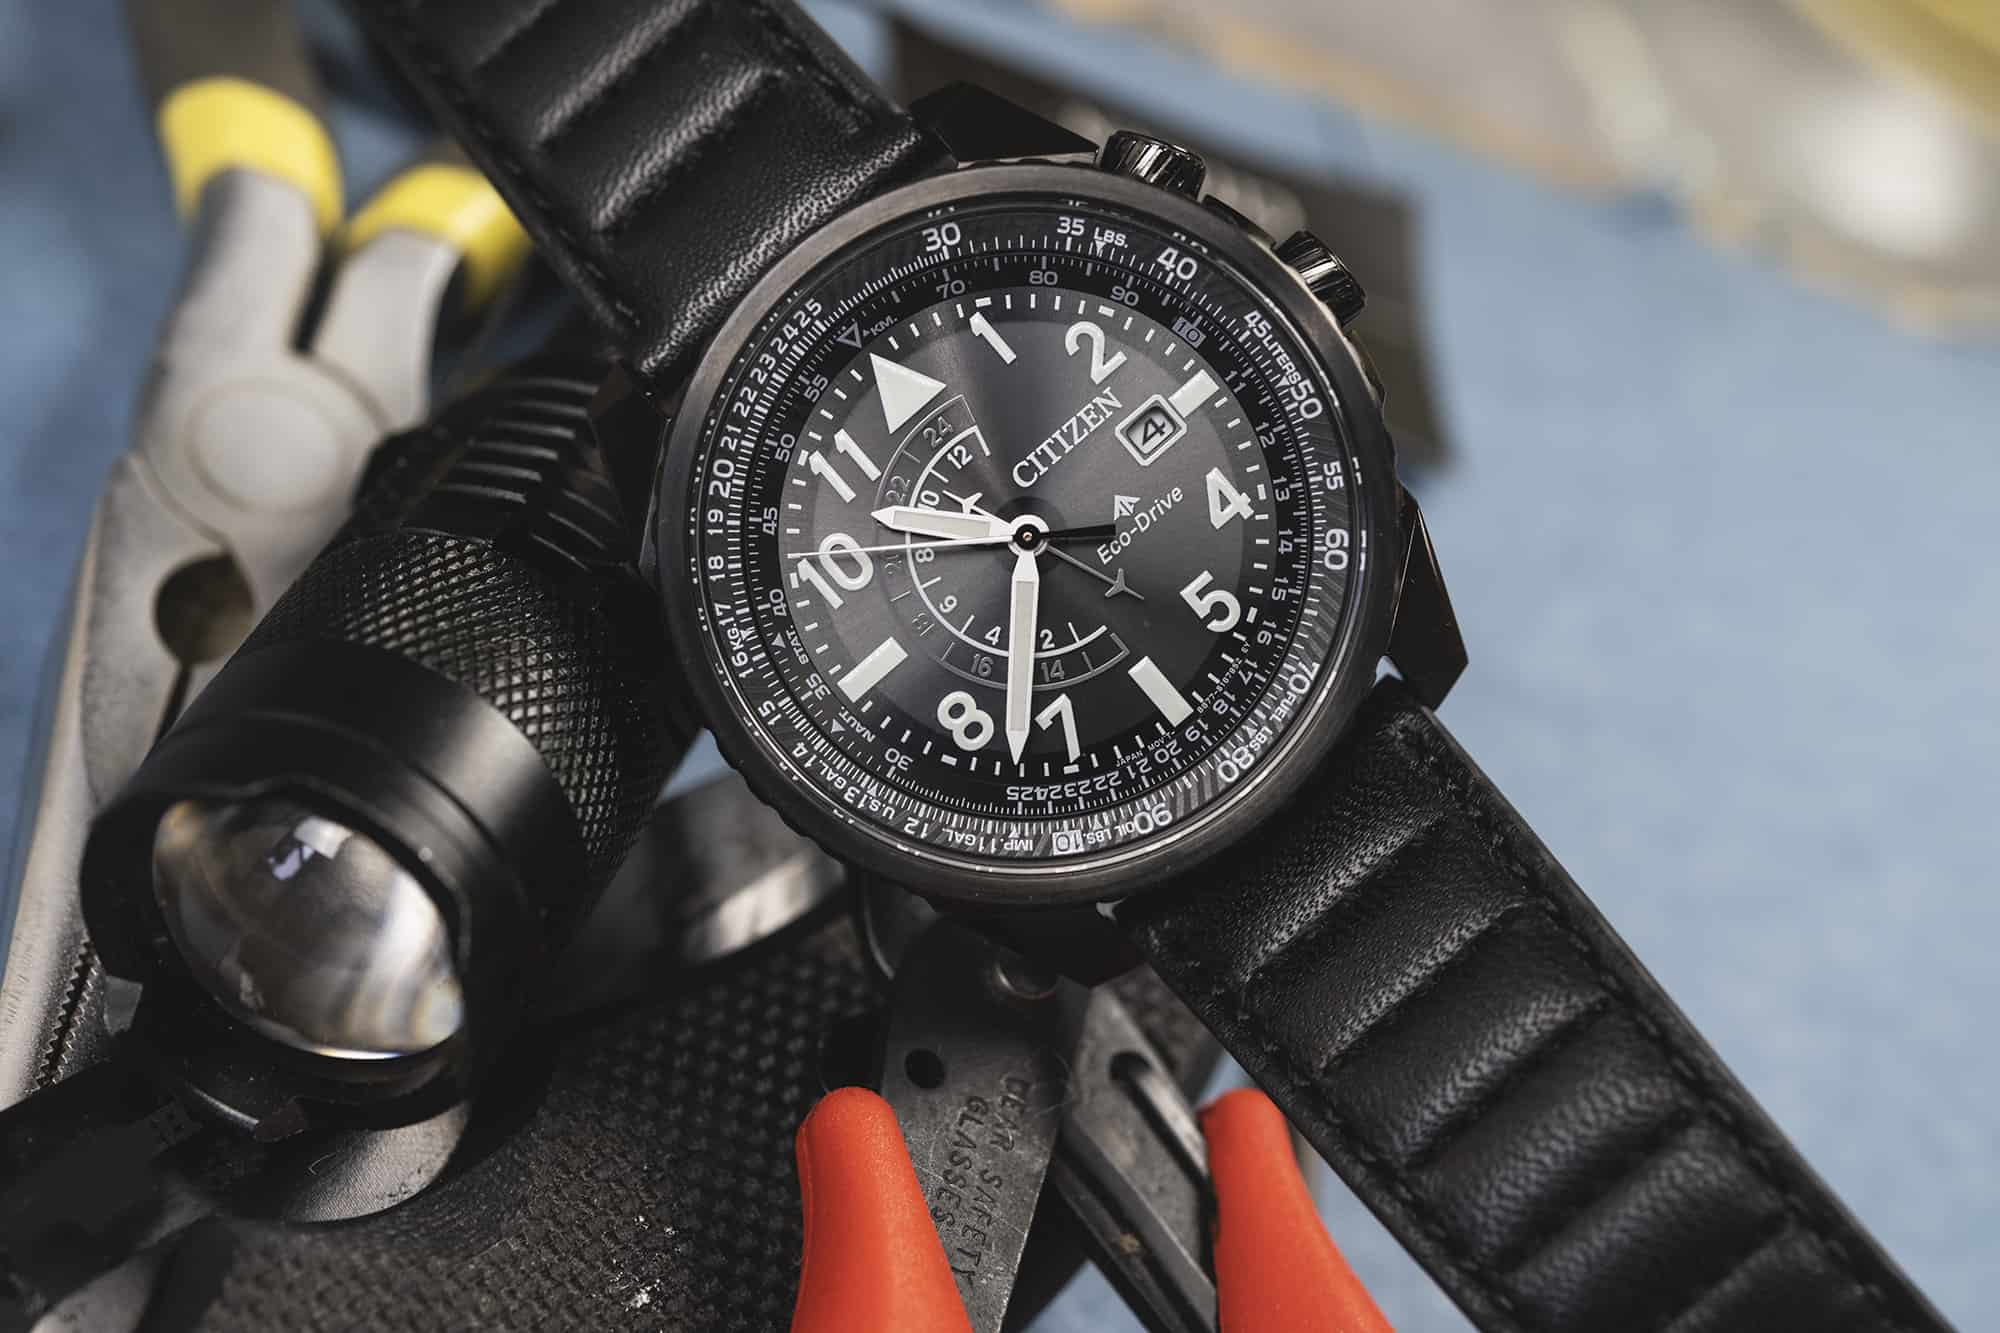 In Detail: Getting Flight-Ready With The Citizen Promaster 